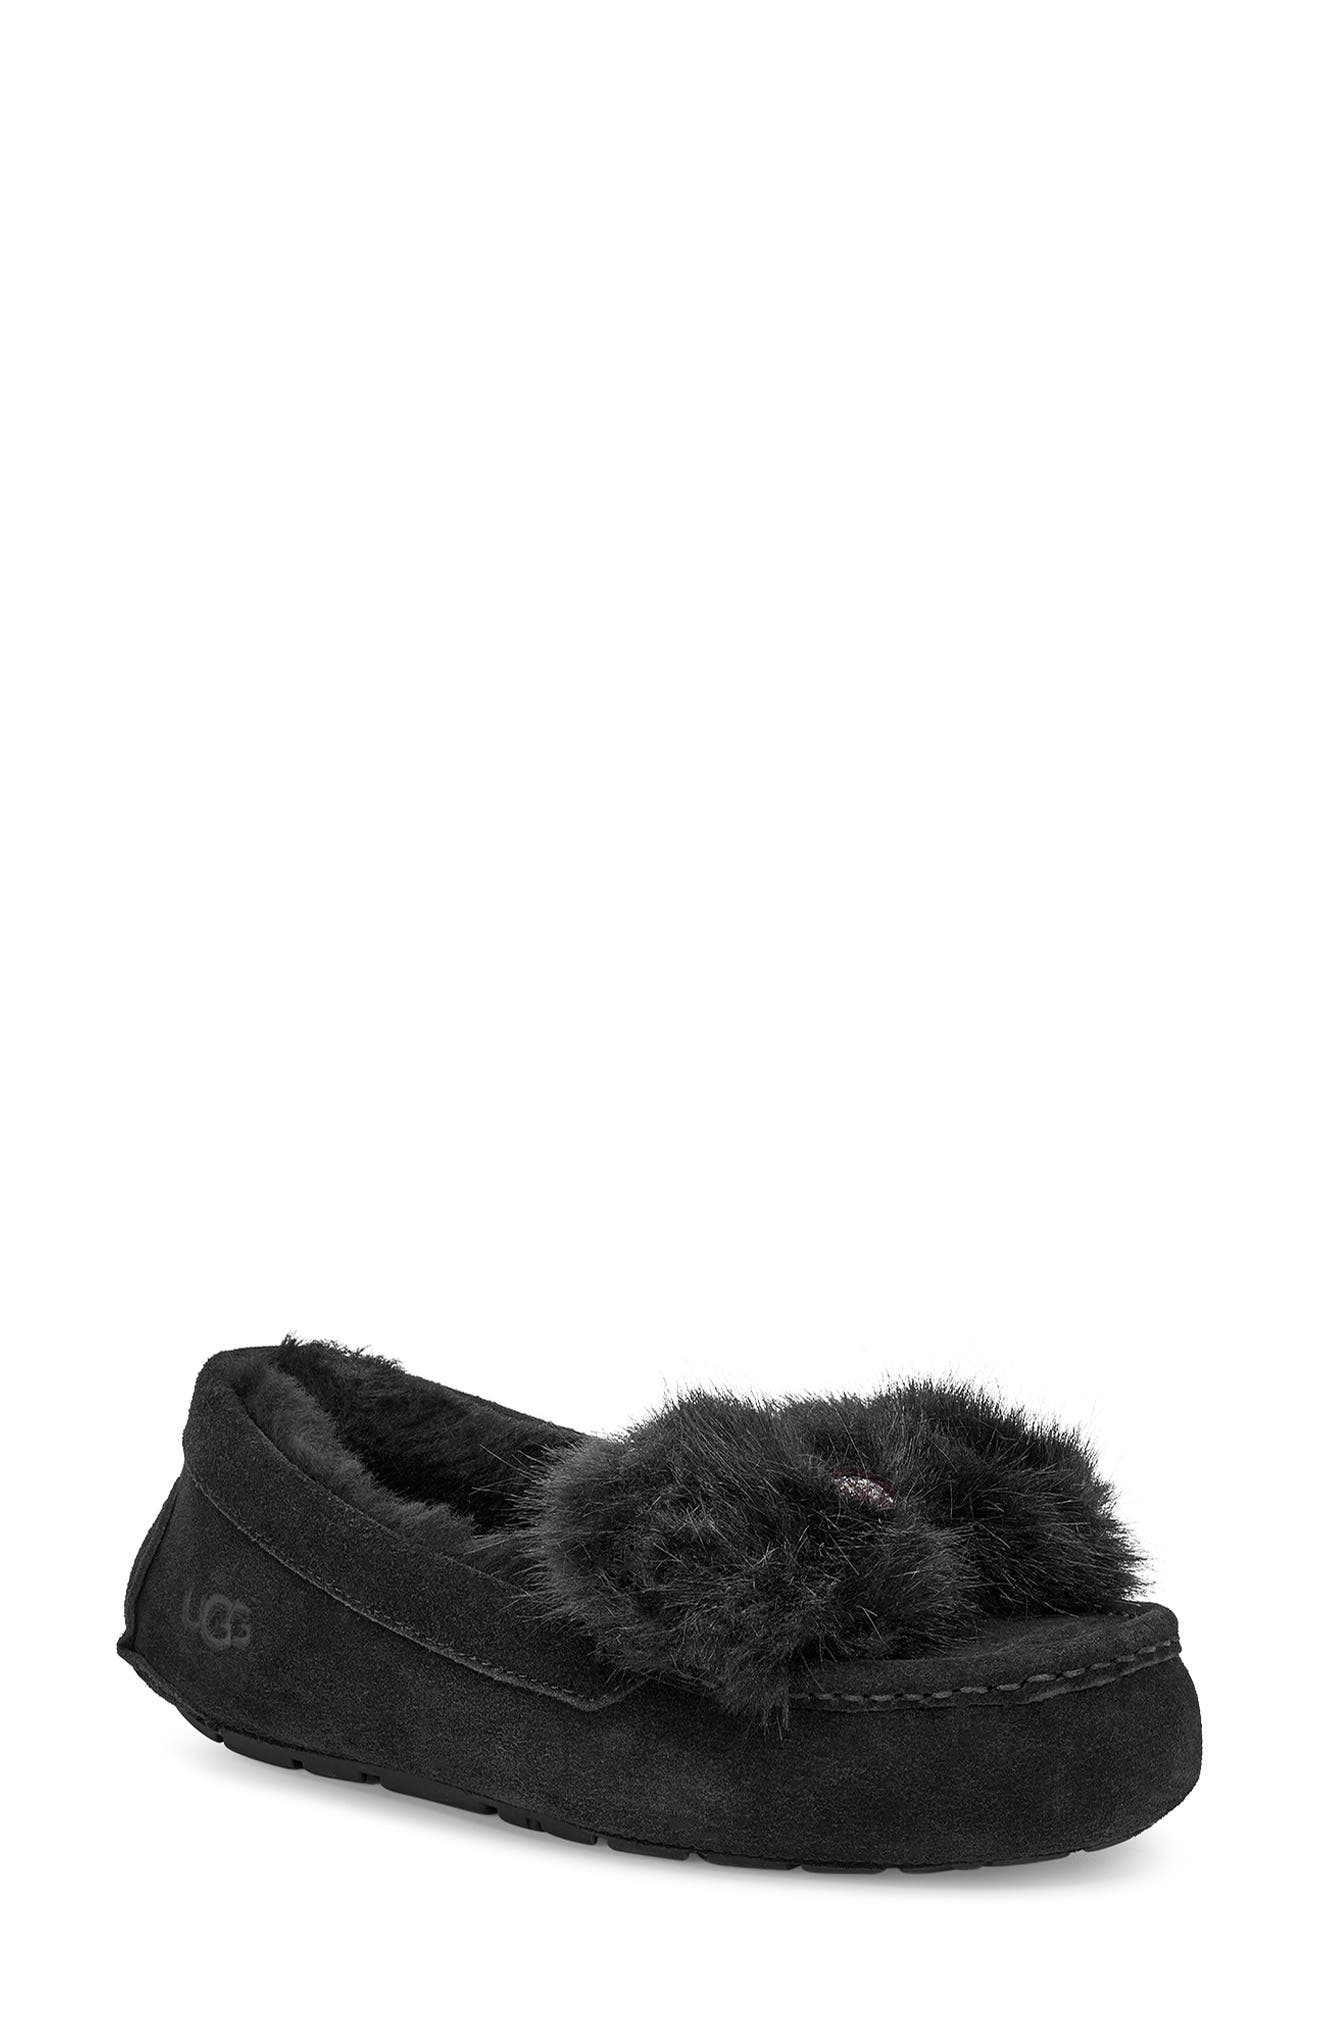 ugg bow slippers